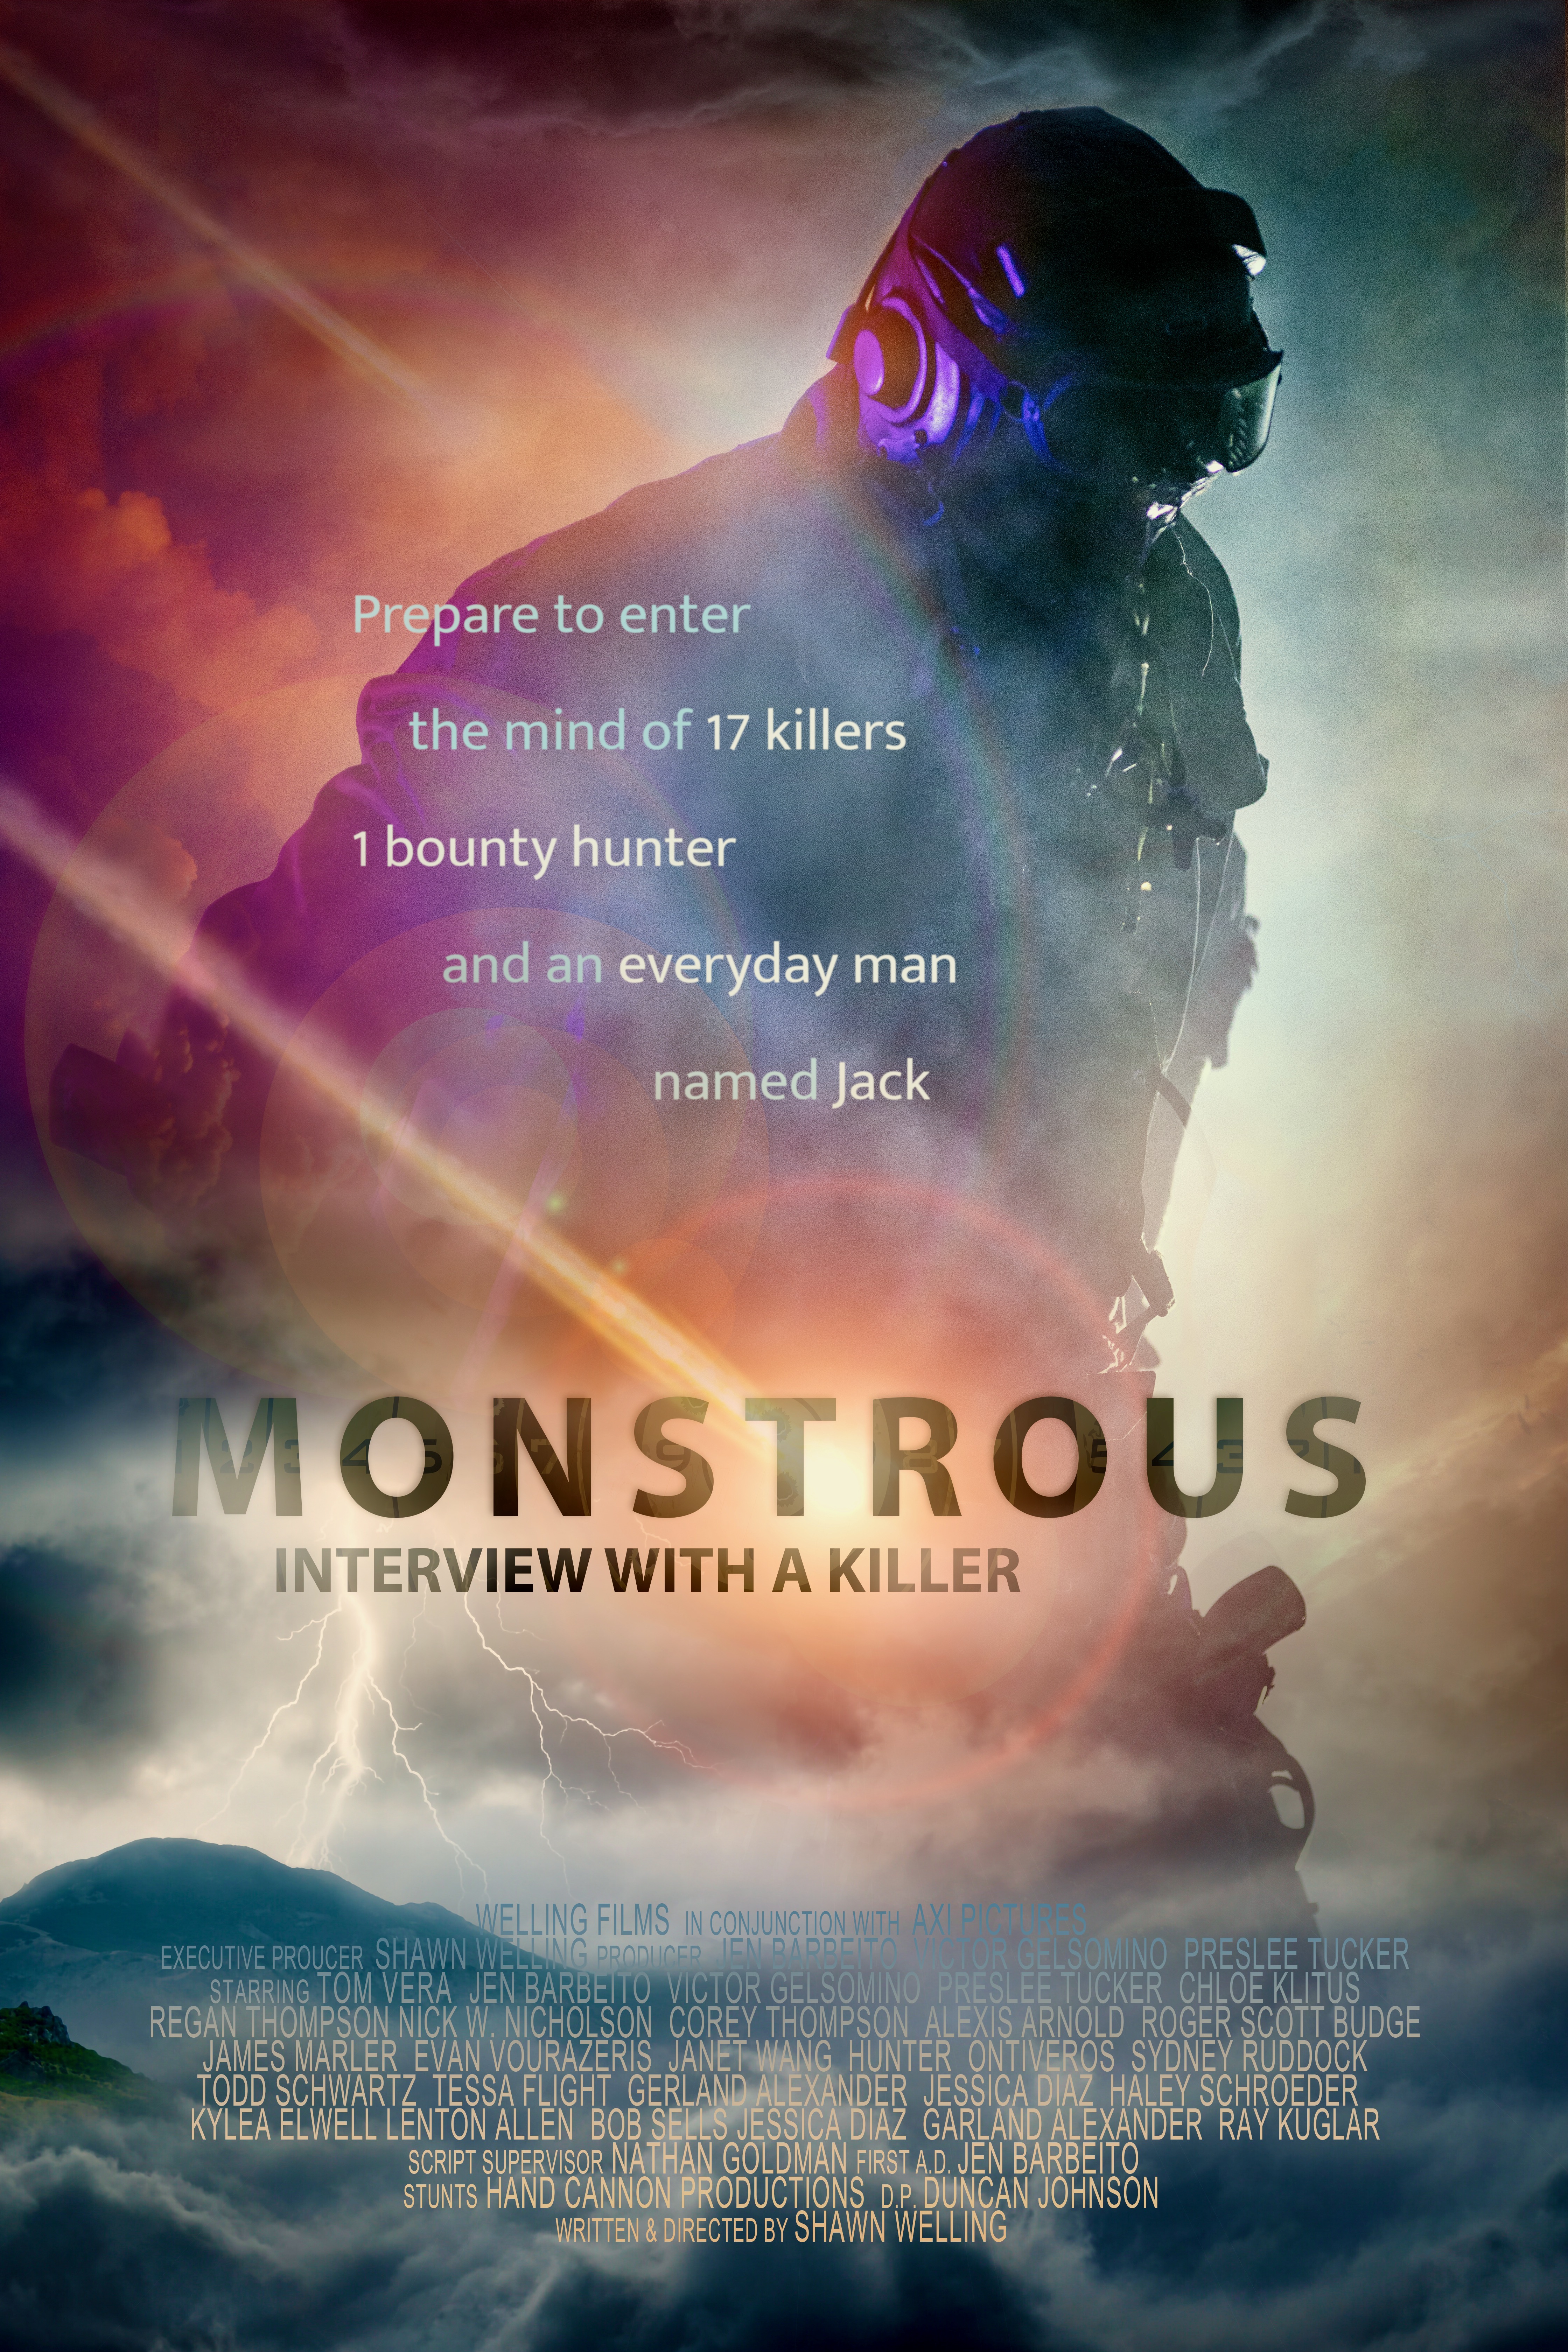 Monstrous: Interview with a Killer (2022) постер